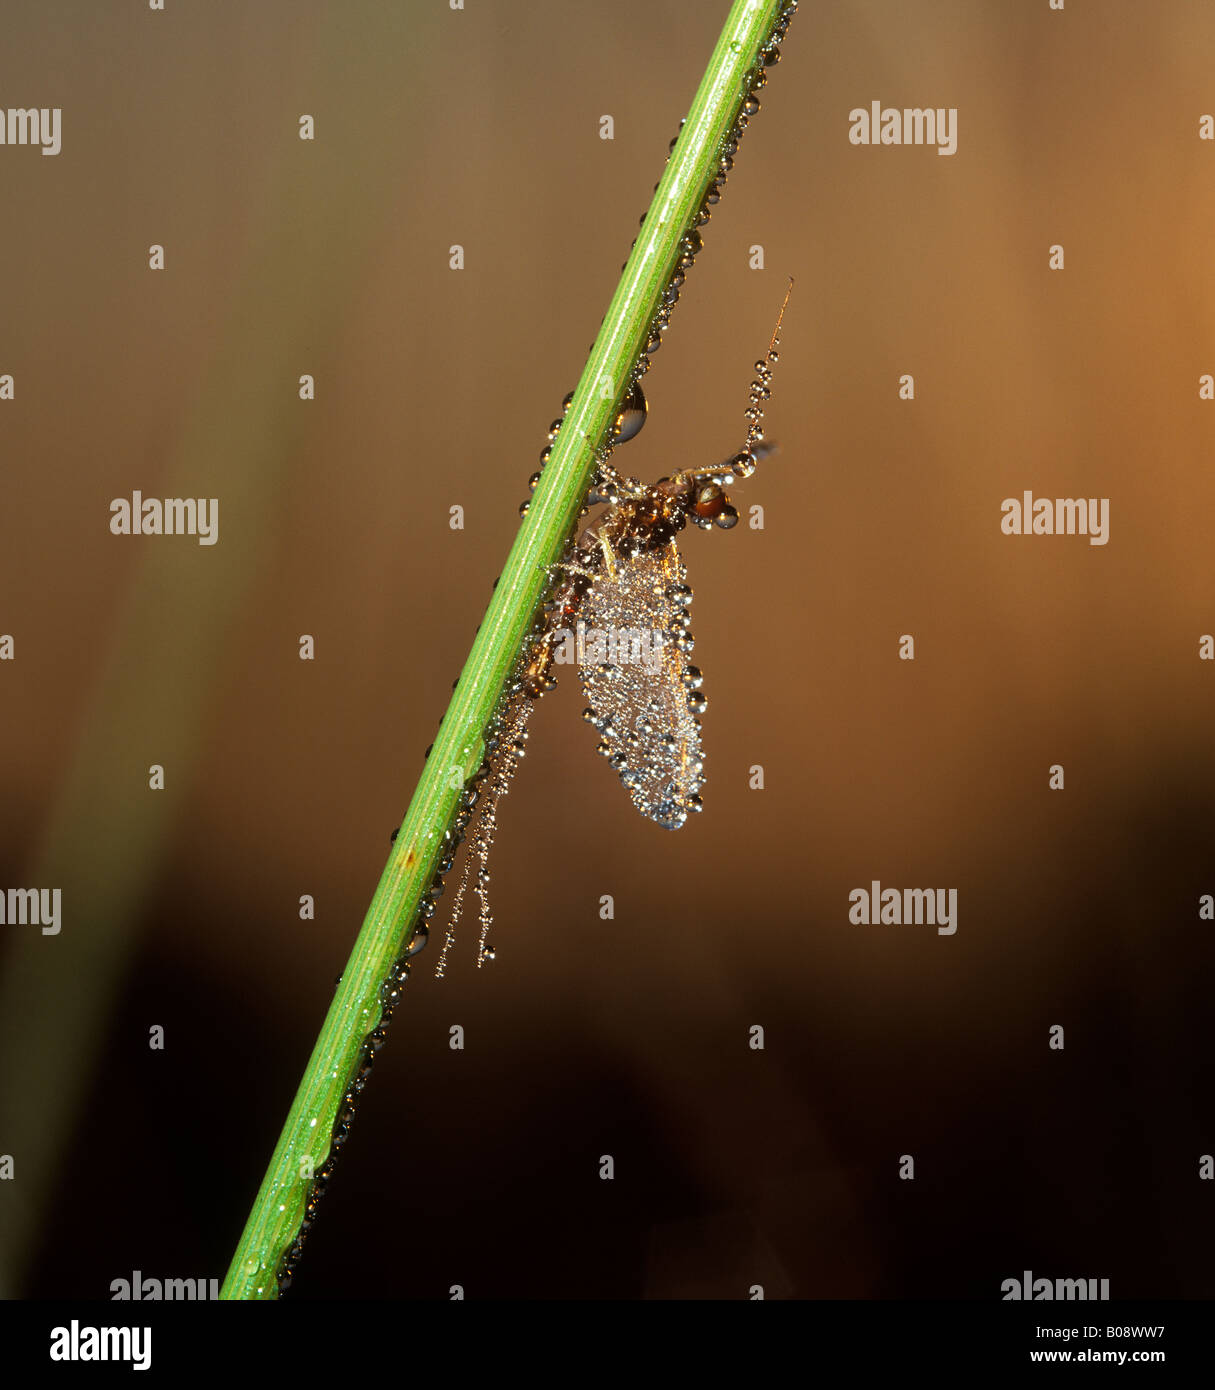 Mayfly or Dayfly ((Ephemeroptera) covered in dew, dewdrops, Germany, Europe Stock Photo